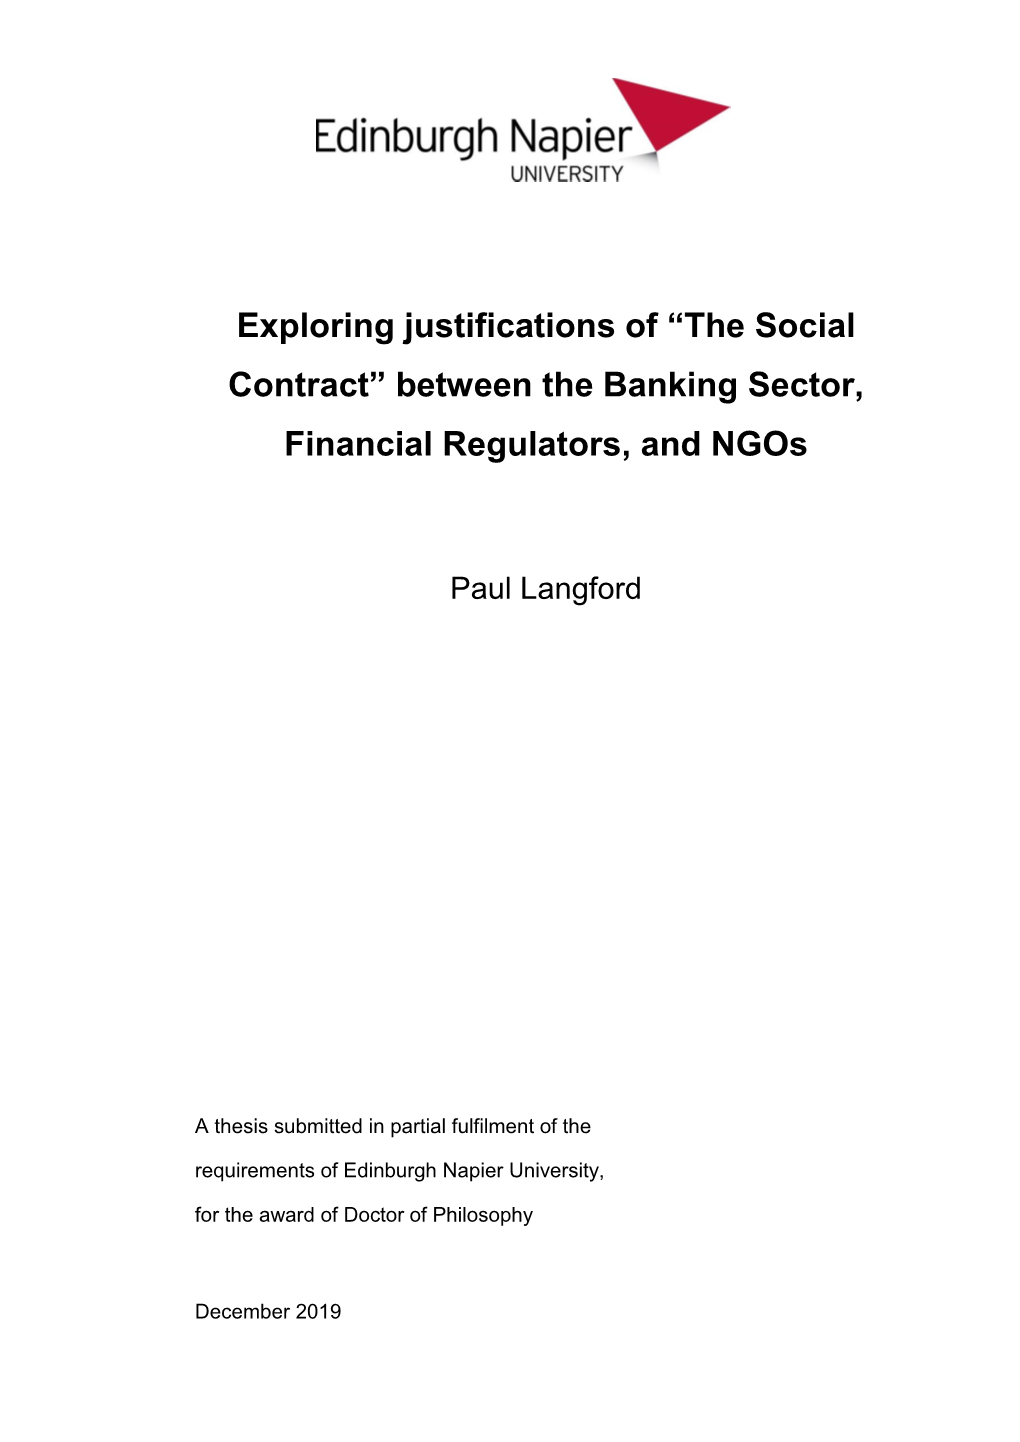 Exploring Justifications of “The Social Contract” Between the Banking Sector, Financial Regulators, and Ngos